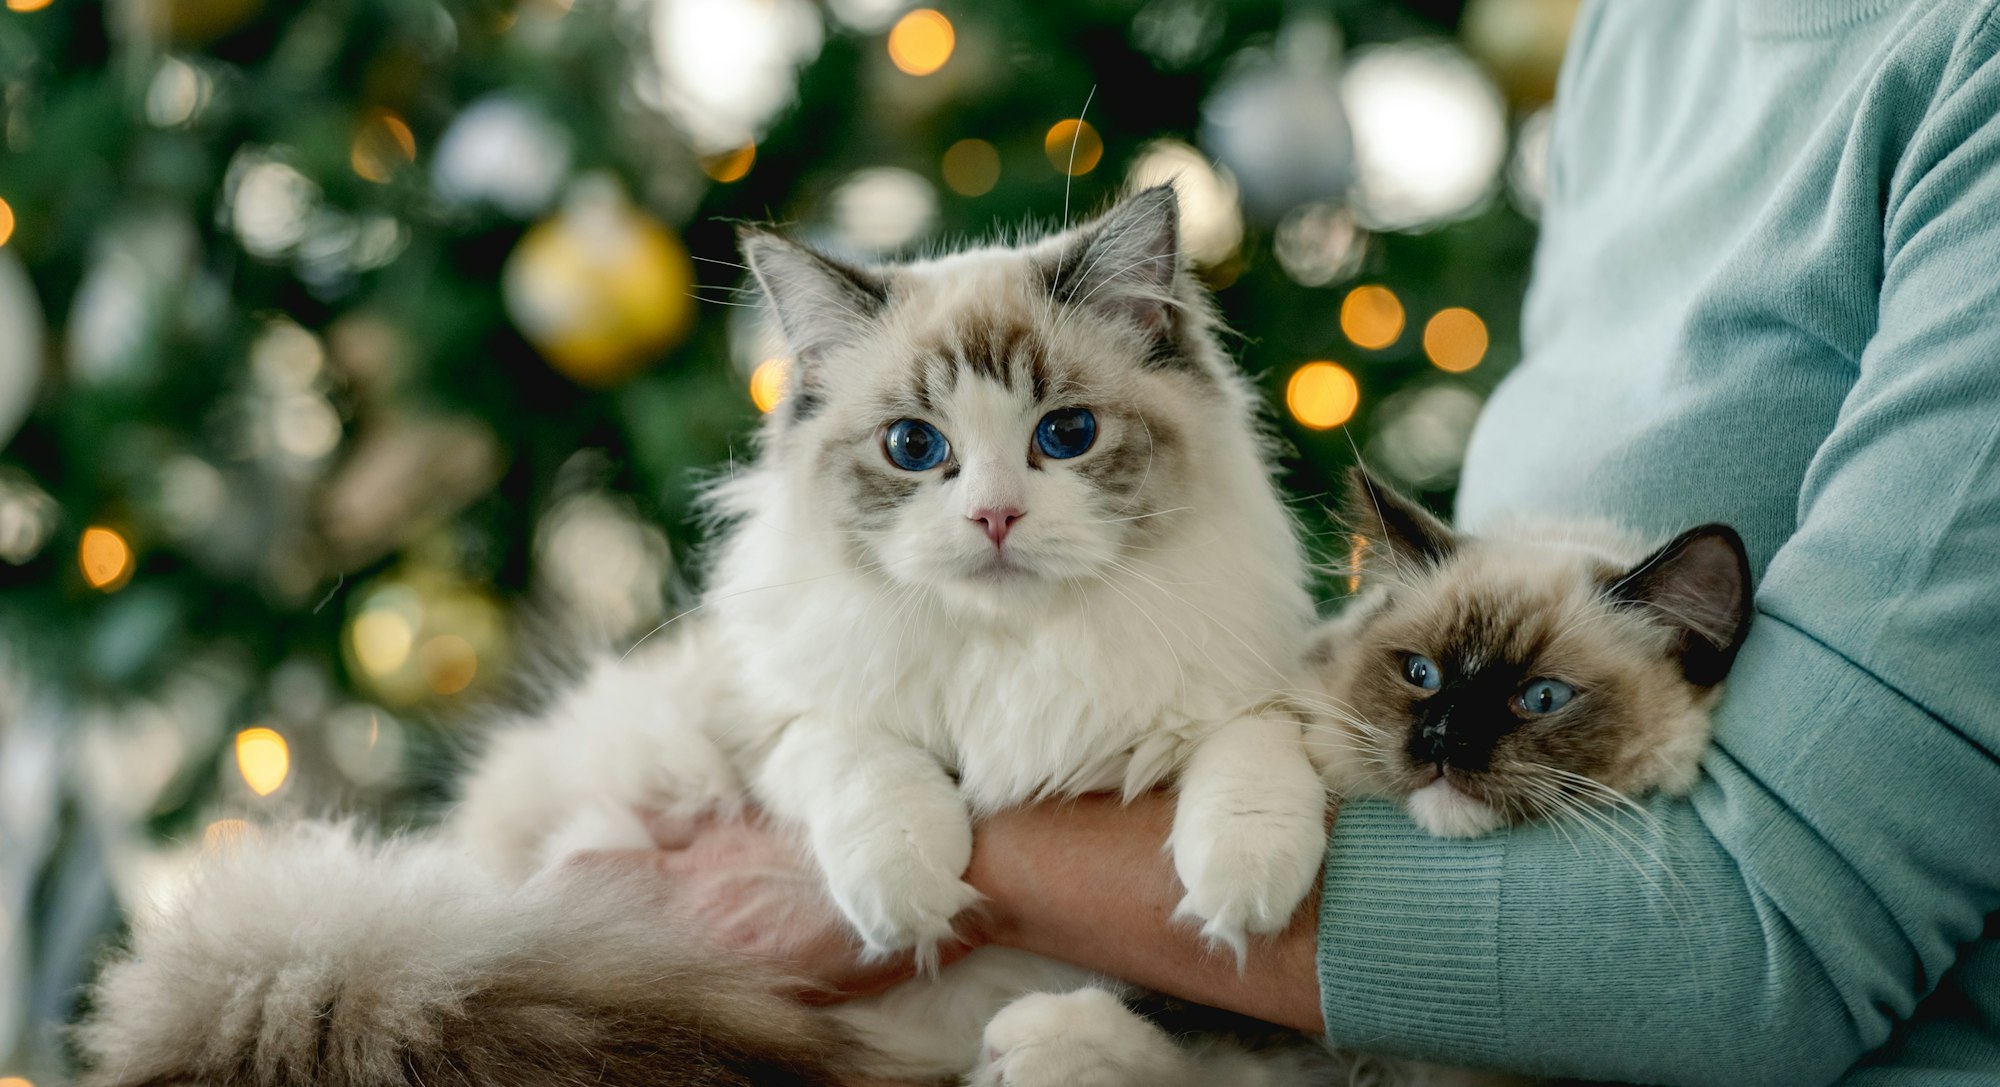 Girl with ragdoll cat in Christmas